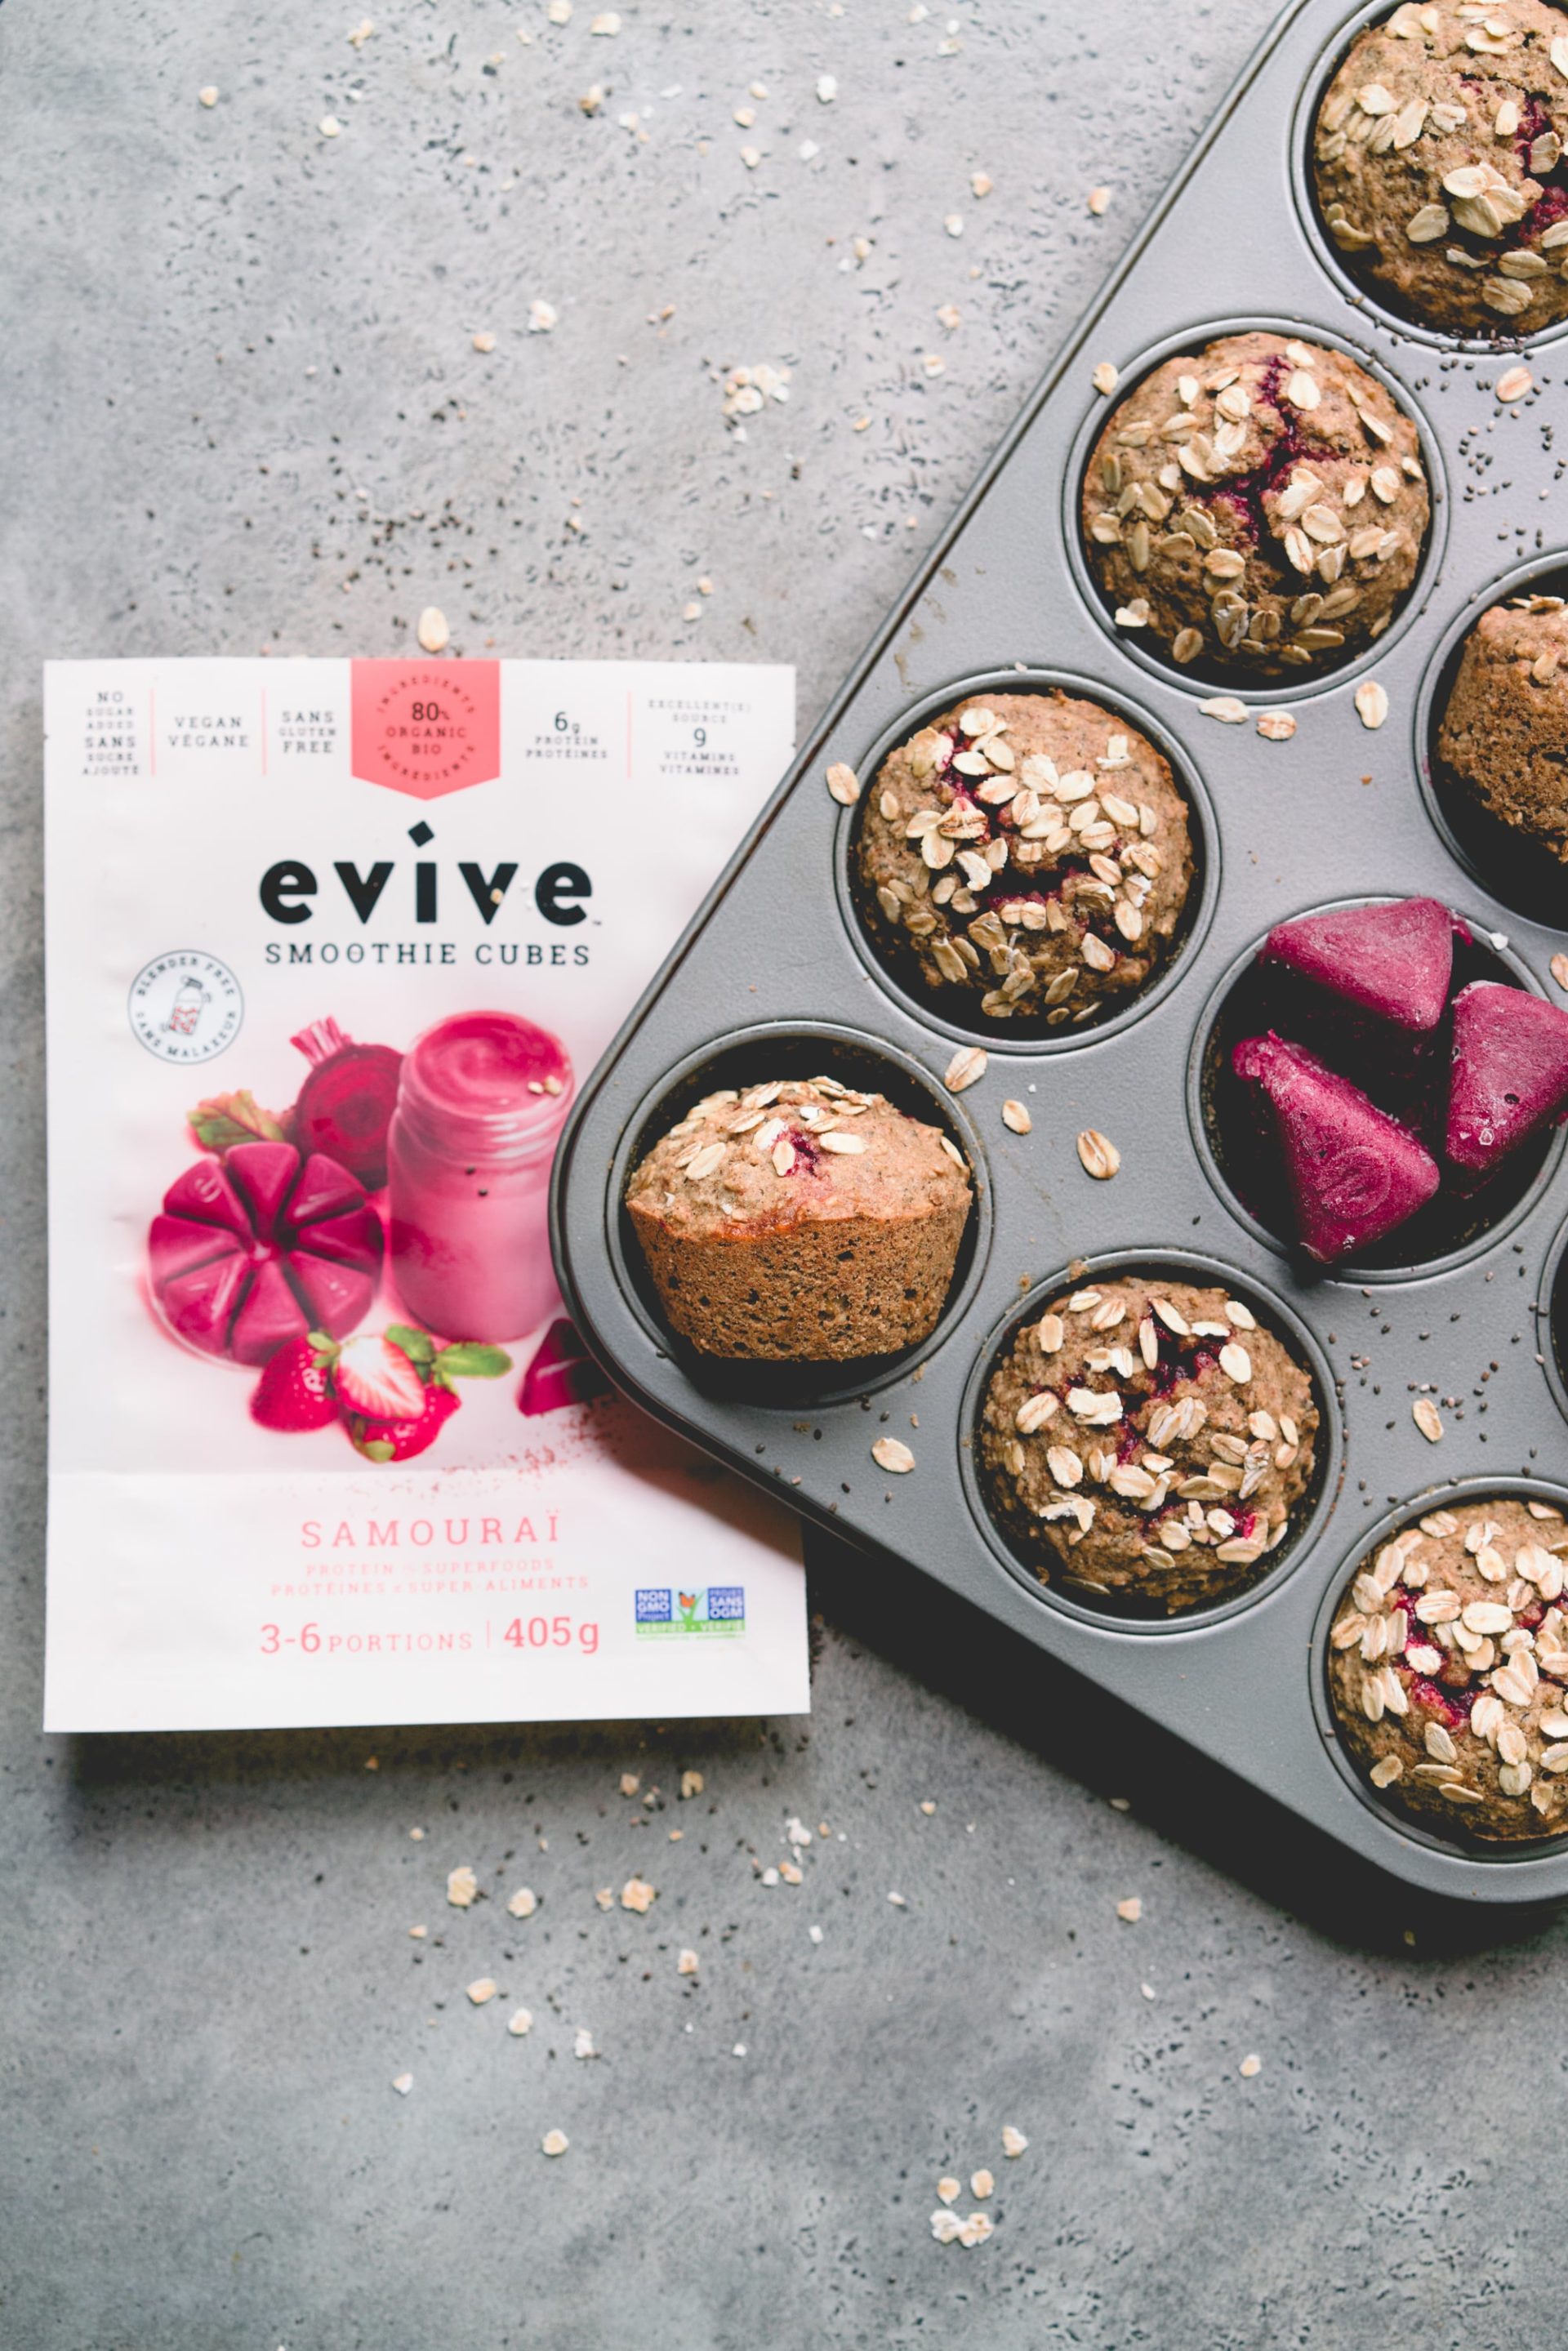 Evive muffins